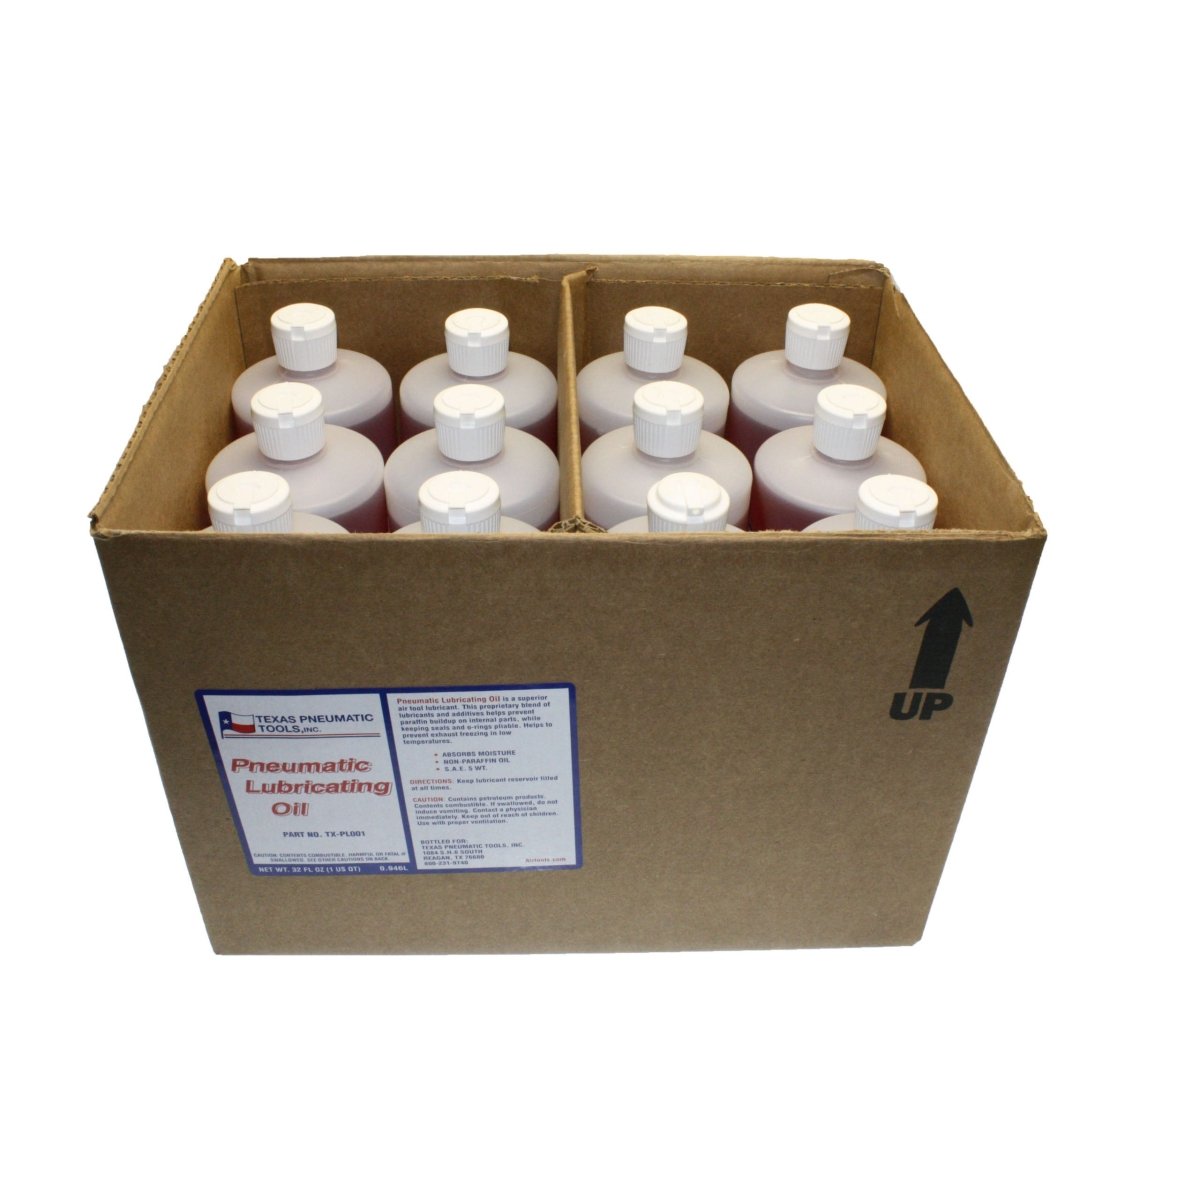 TX-PL001 - Pneumatic Lubricating Oil (Case of 12) - Texas Pneumatic Tools